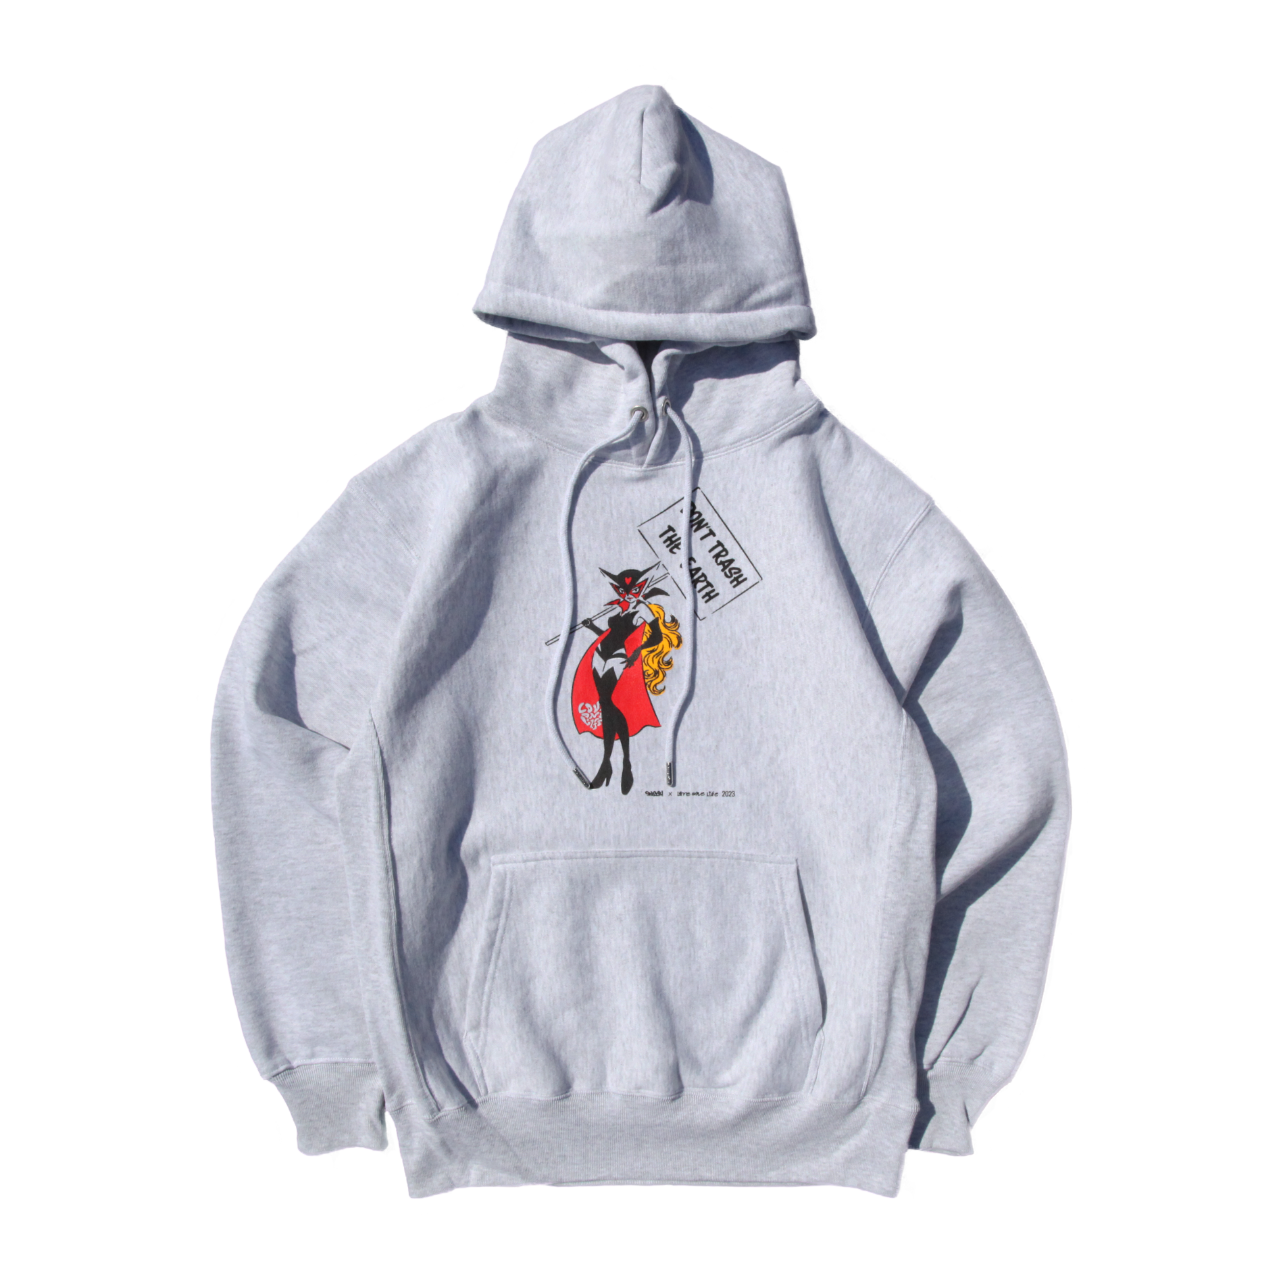 protester girl reverse weave hoodie in gray